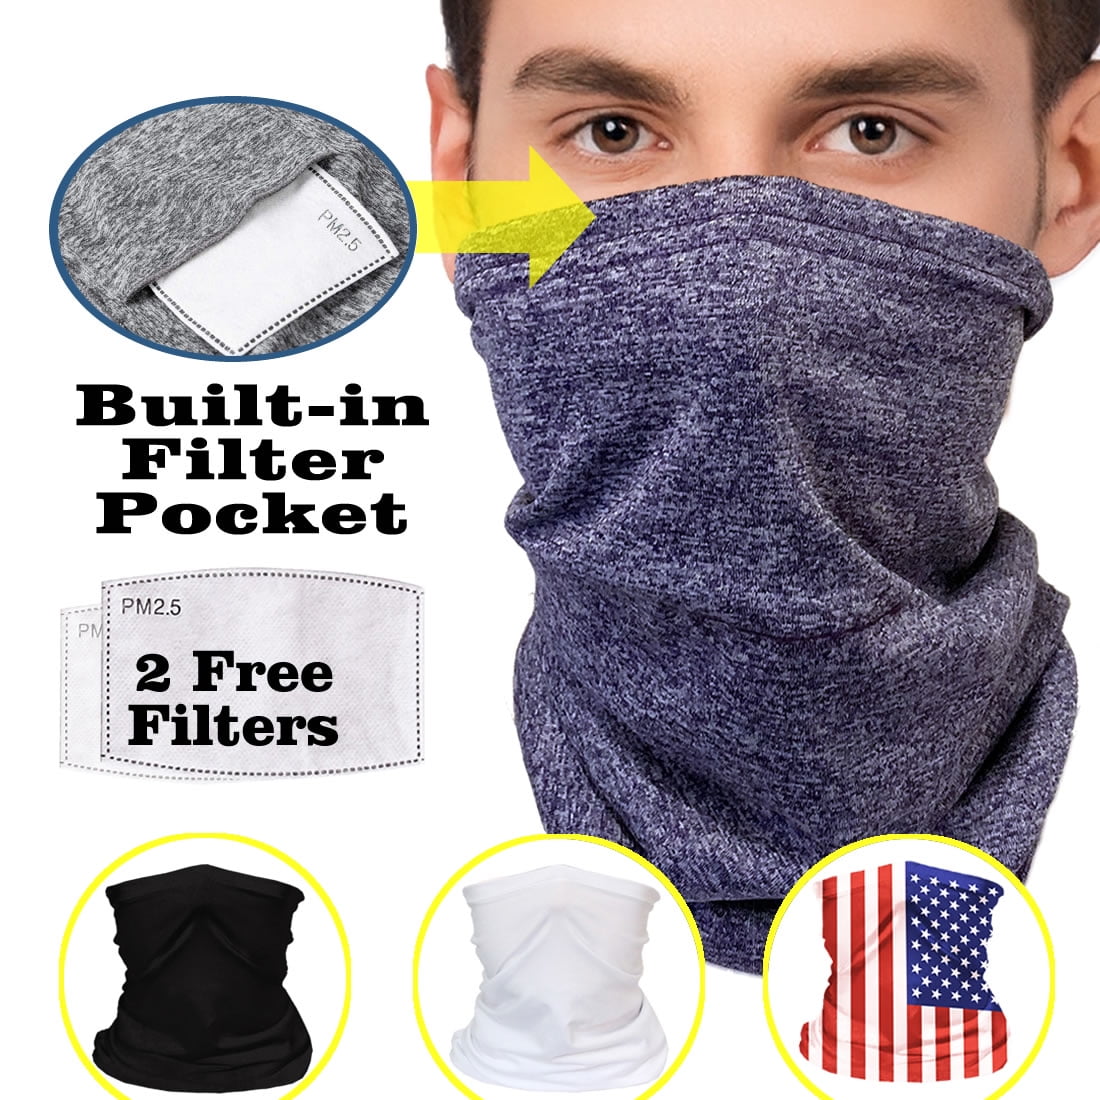 Details about   Cooling Neck Gaiter Face Mask Quick Dry Bandana Thin Scarf Balaclava Headwrap US 